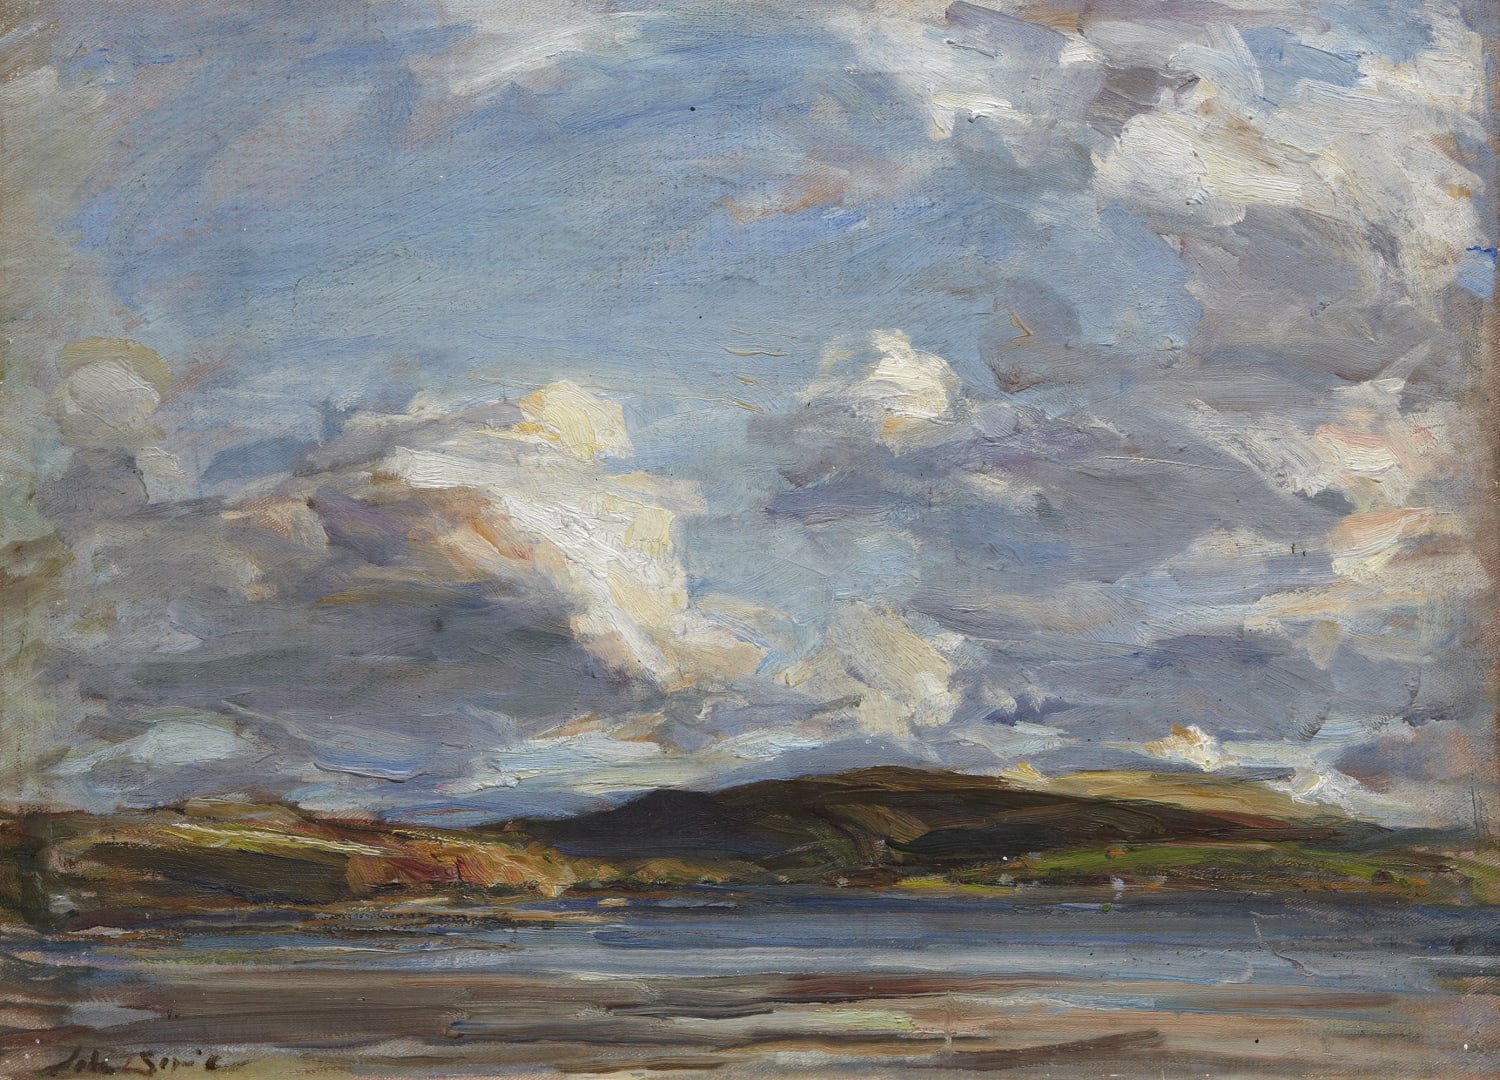 John Bowie ARSA (1863-1941), Estuary  oil on canvas, around 1940-1941  Thorburn Ross Memorial Fund Purchase, 1942. 2005.023